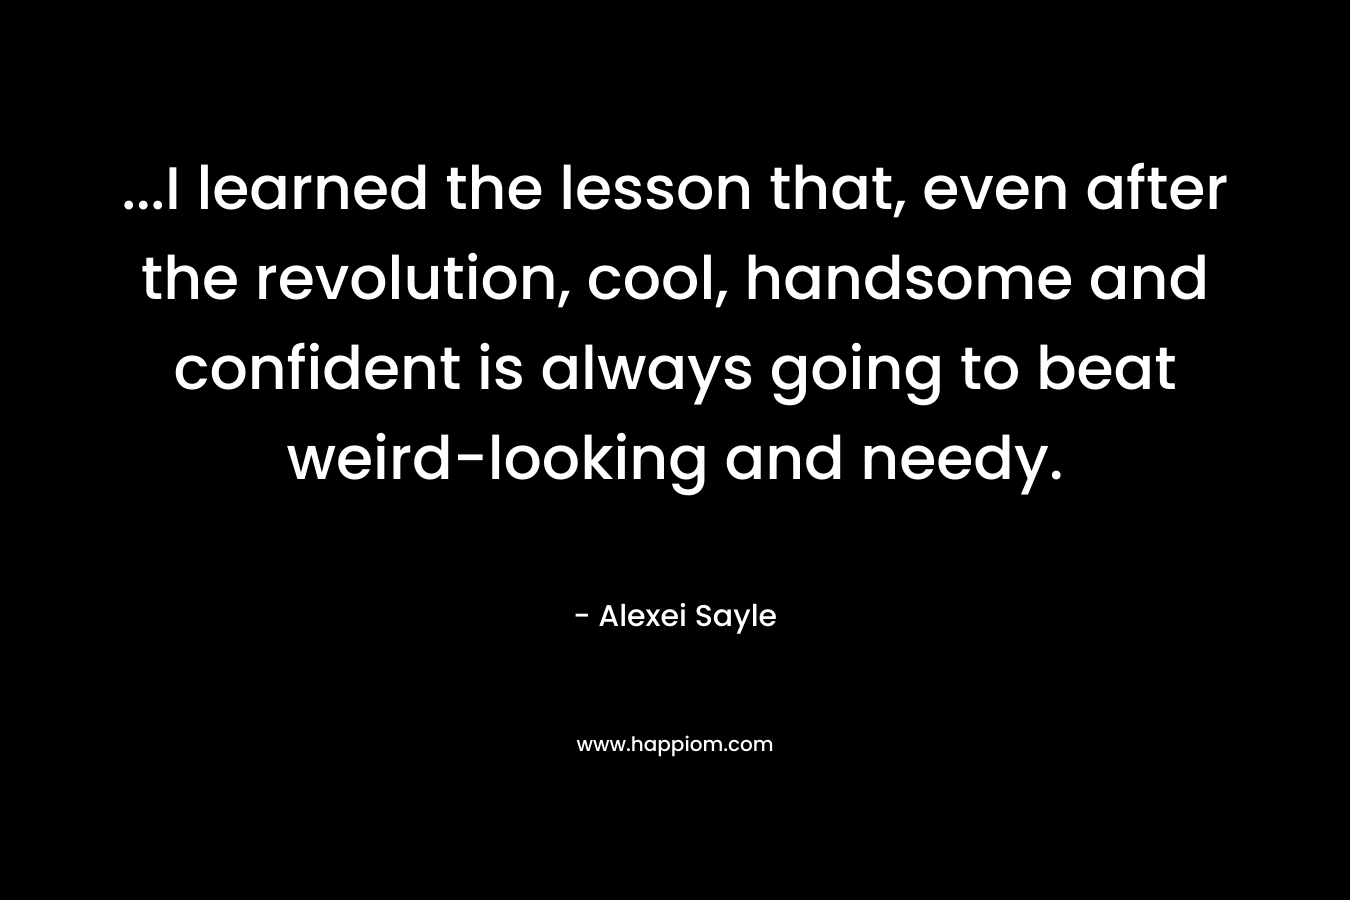 …I learned the lesson that, even after the revolution, cool, handsome and confident is always going to beat weird-looking and needy. – Alexei Sayle